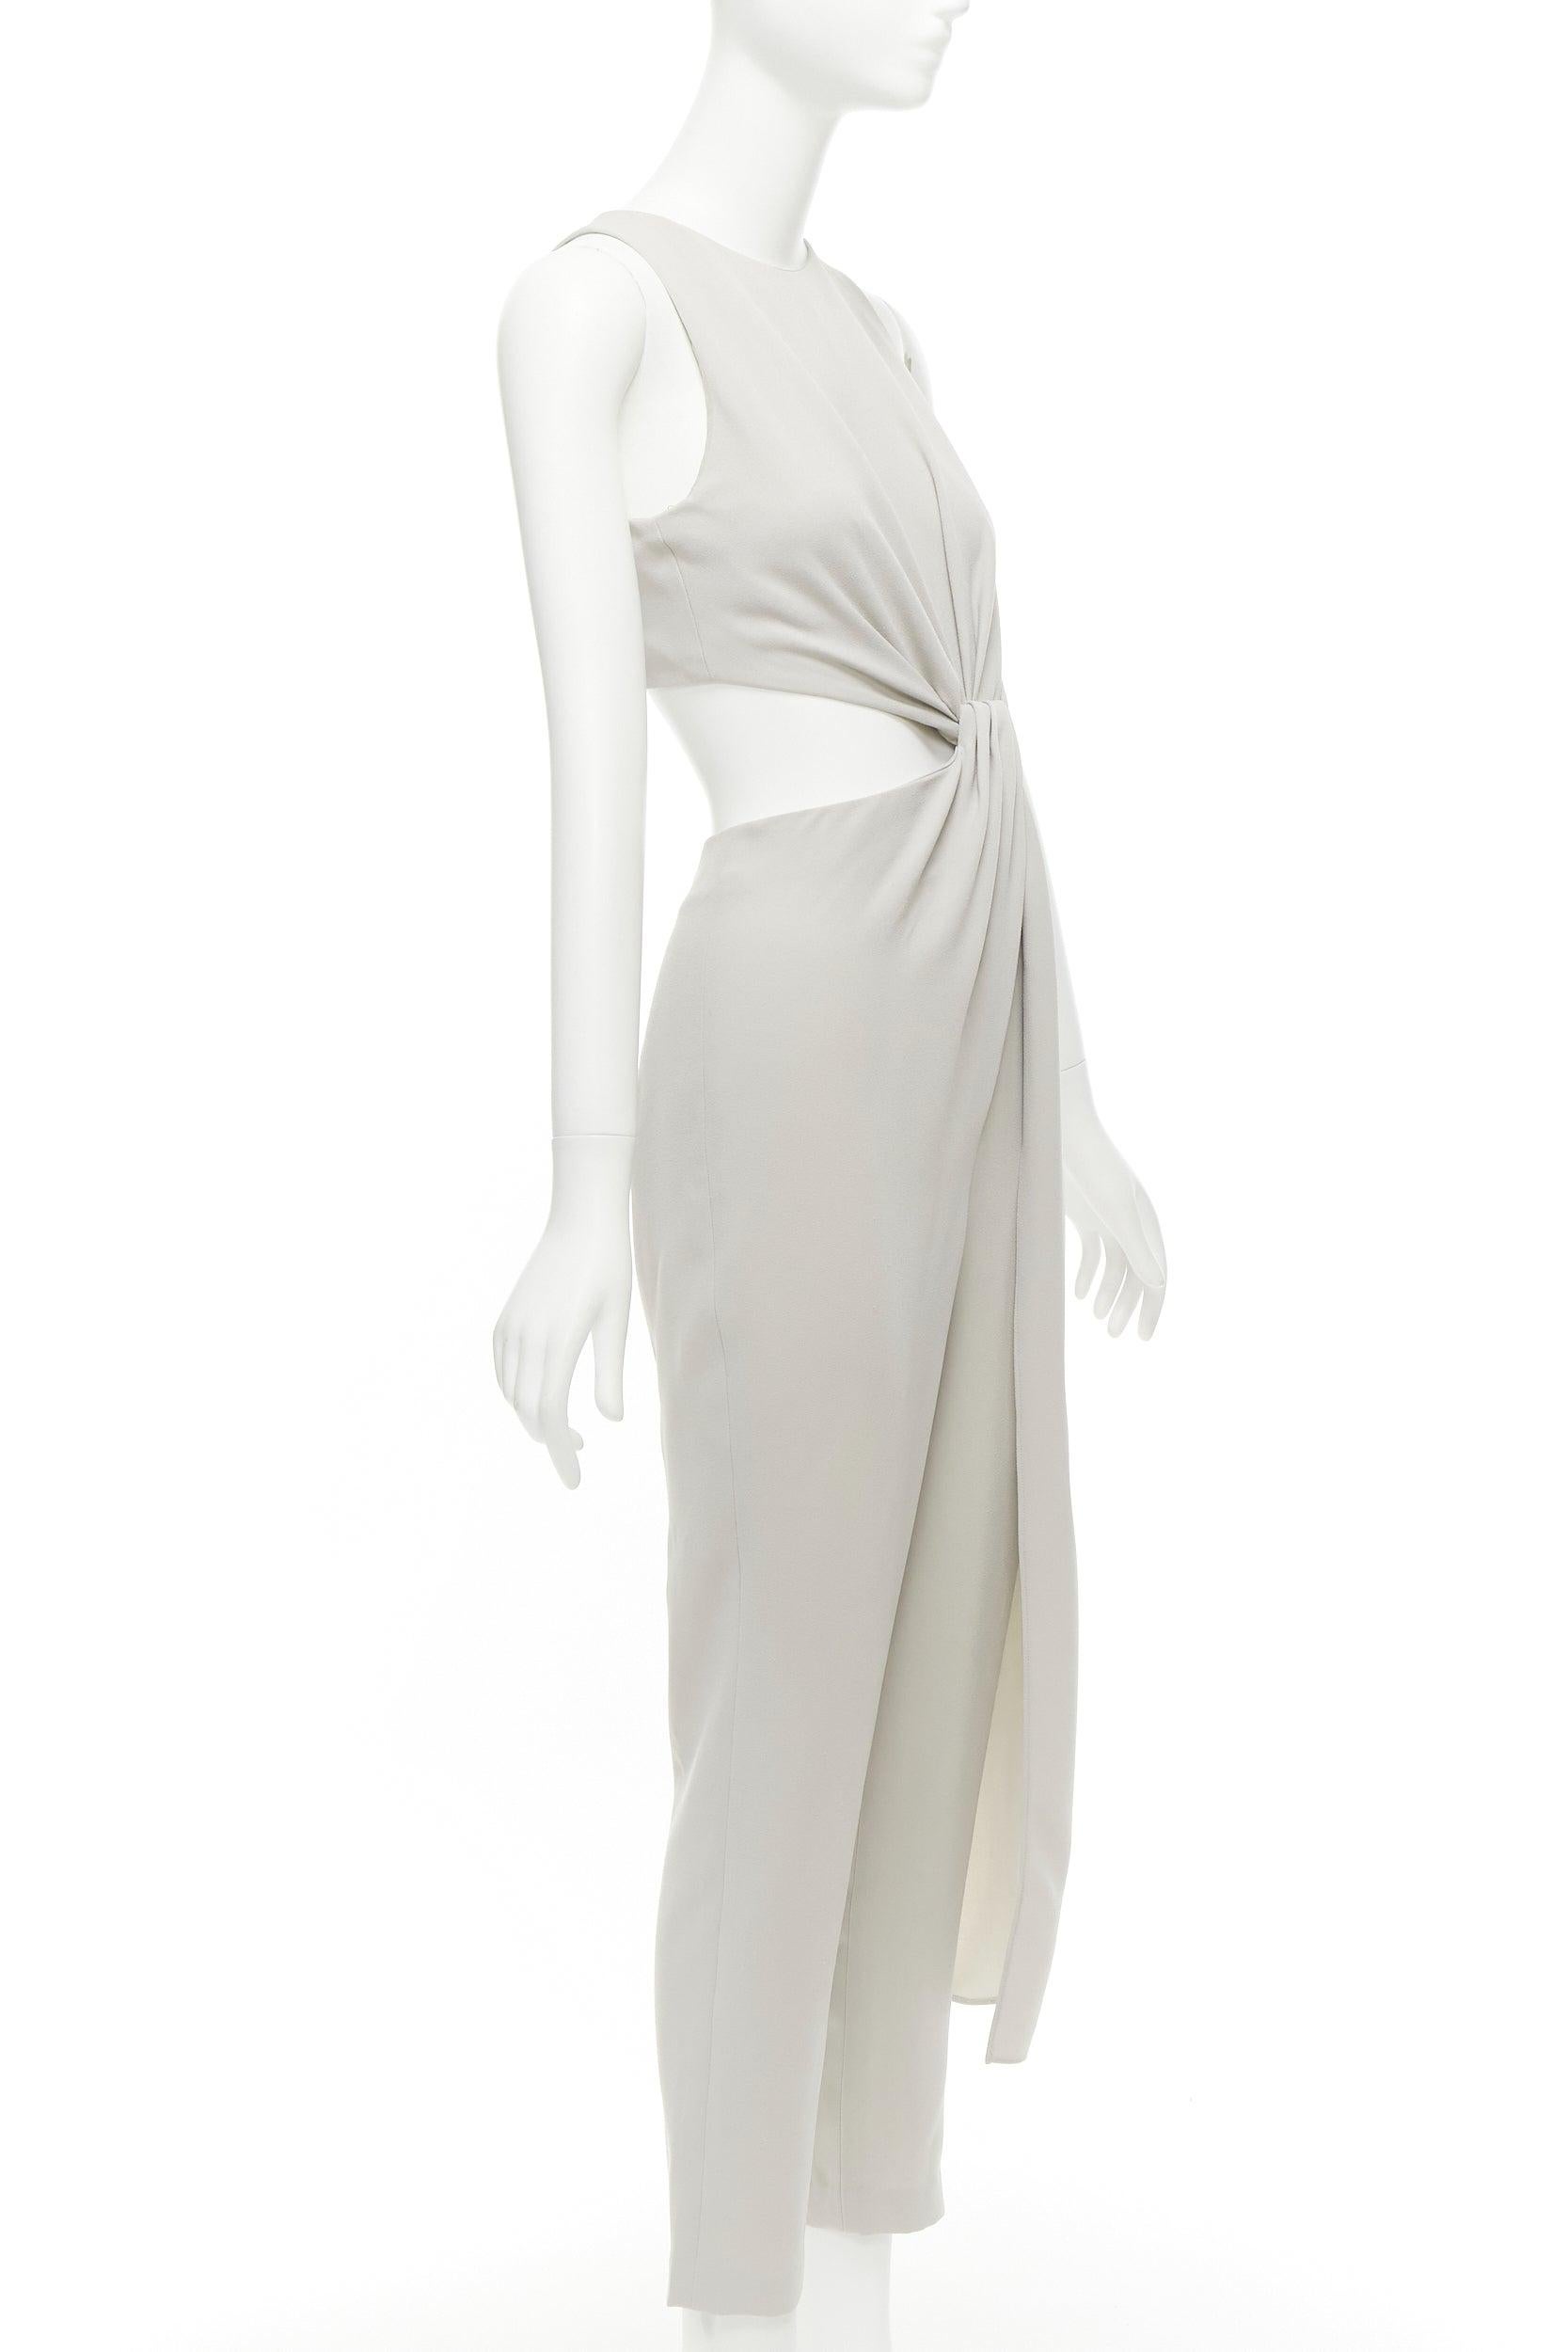 HALSTON HERITAGE grey cut out drape waist asymmetric cropped jumpsuit US0 XS
Reference: CELG/A00381
Brand: Halston Heritage
As seen on: Sienna Miller
Material: Polyester
Color: Grey
Pattern: Solid
Closure: Zip
Lining: Grey Fabric
Extra Details: